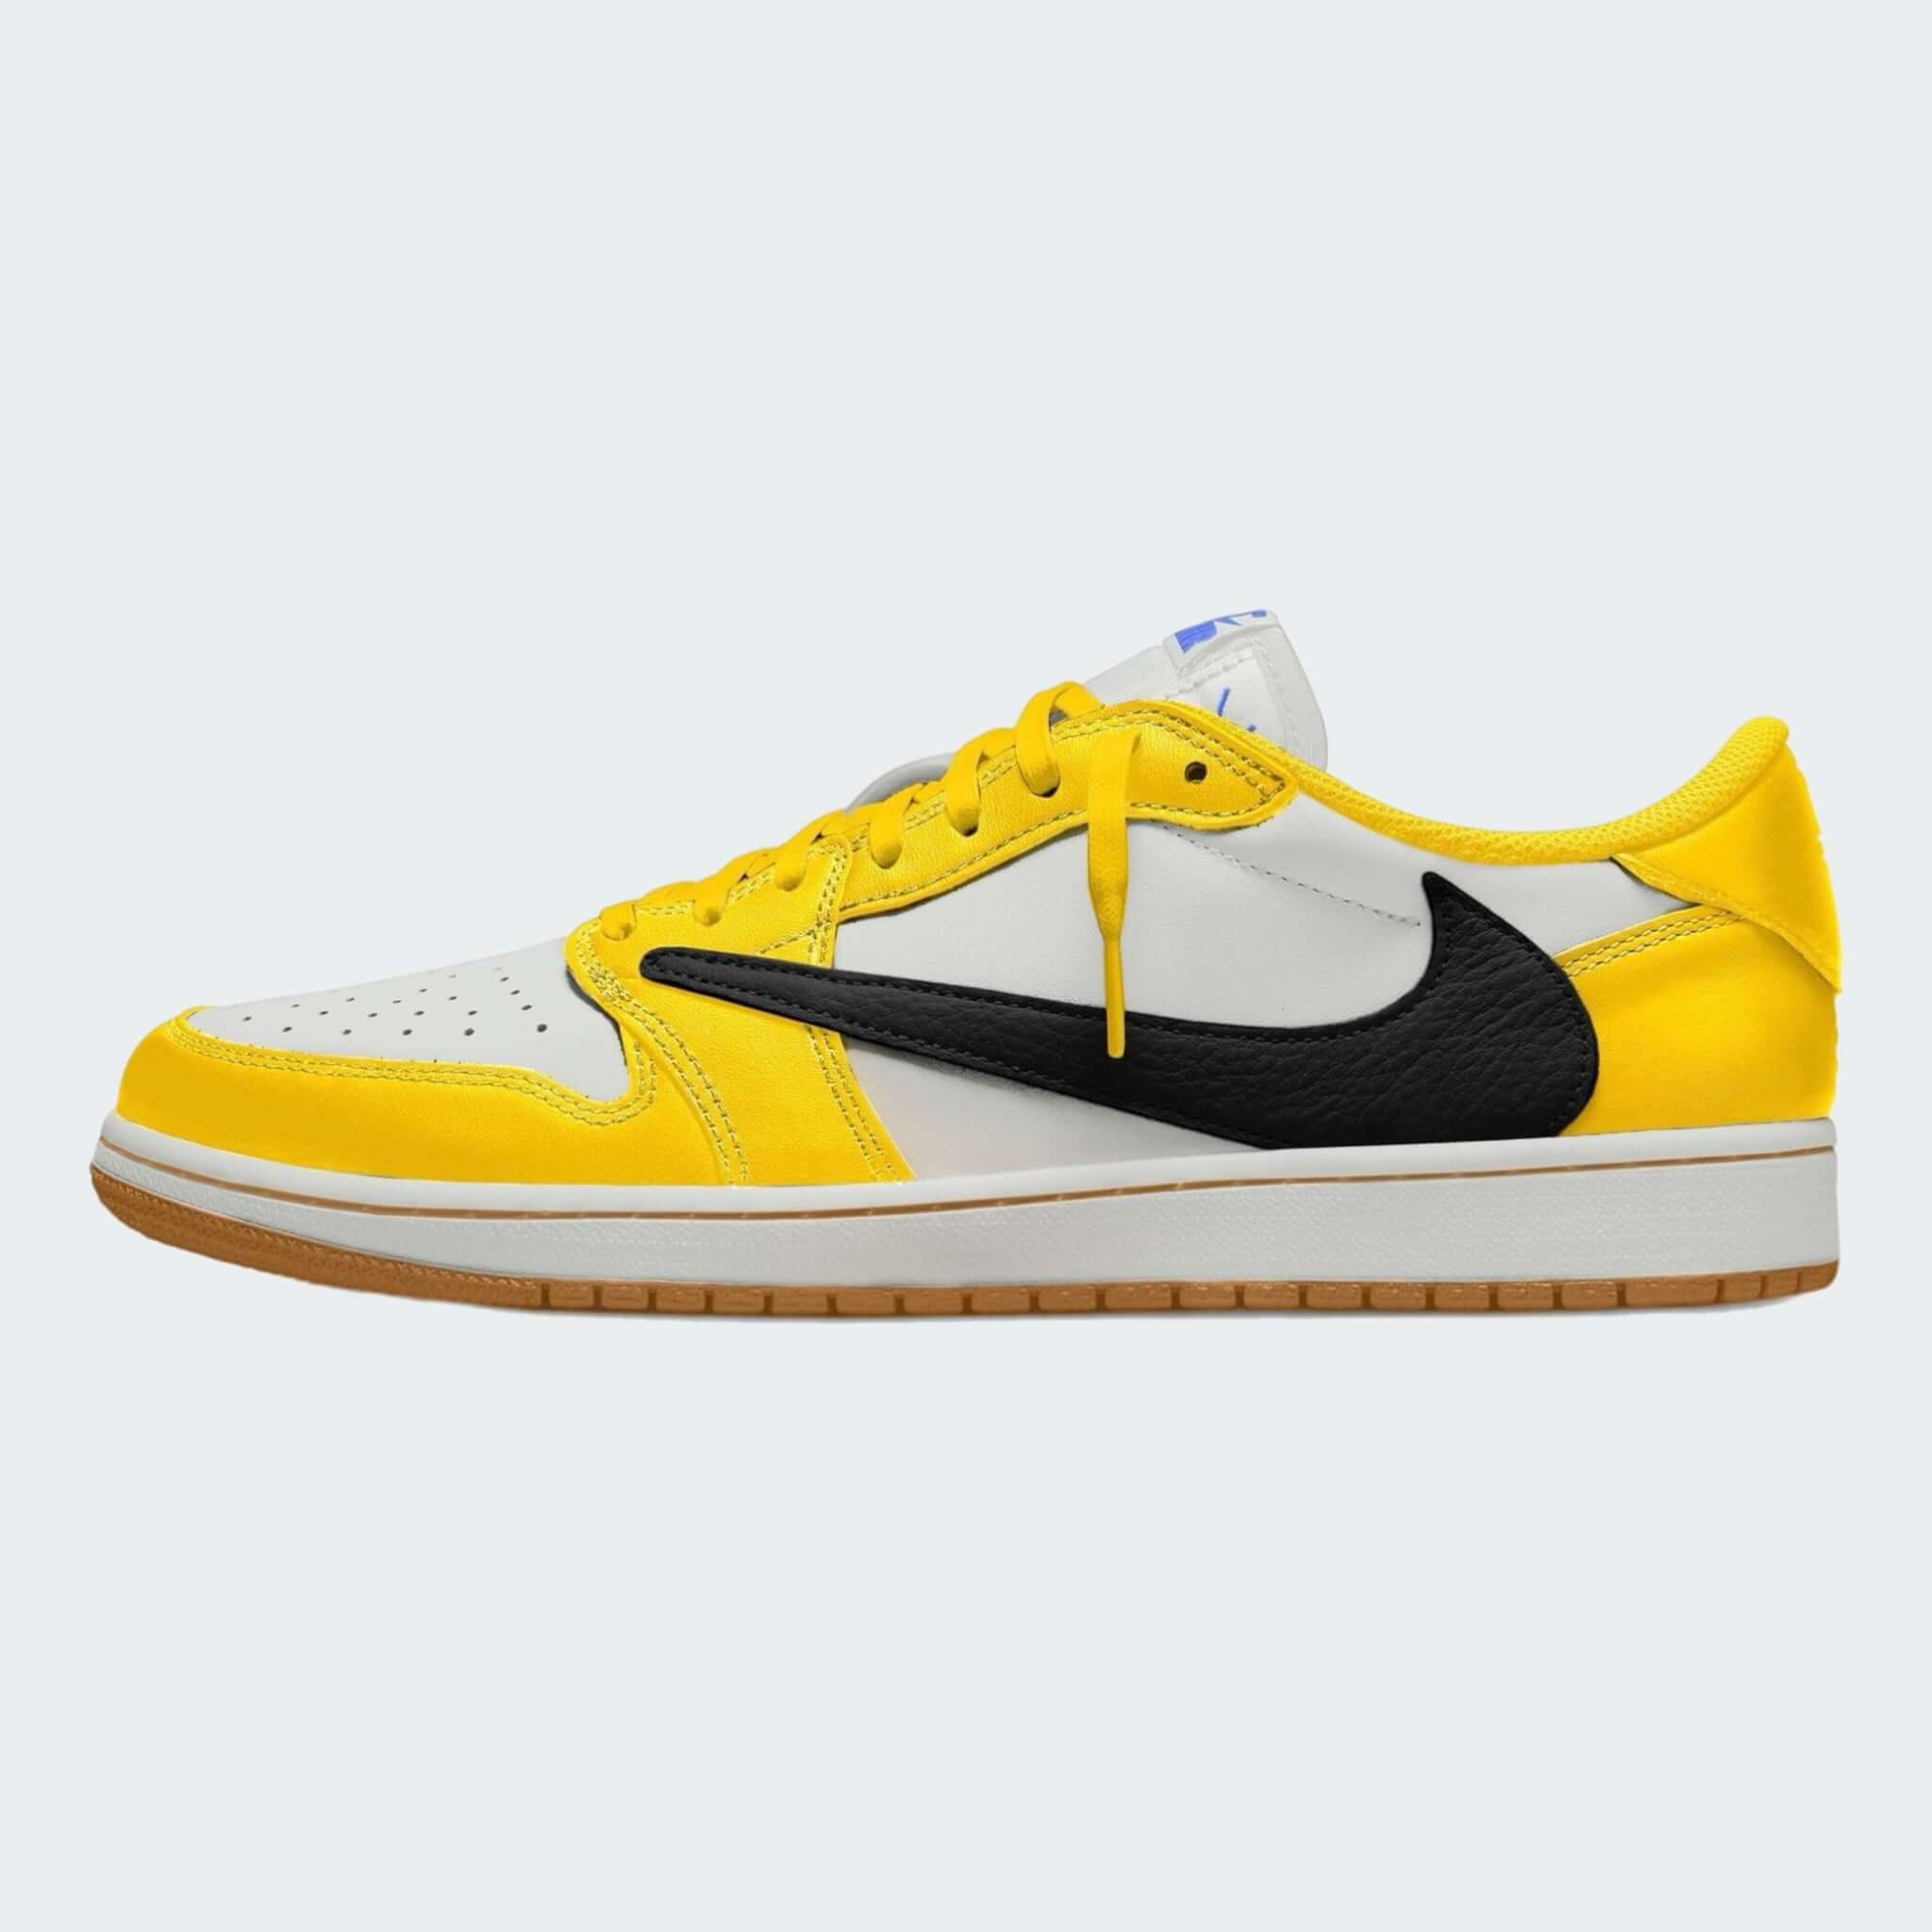 Travis Scott x Air Jordan 1 Low OG (W) "Canary" | | $799.99 | $799.99 | $799.99 | Shoes | Marching Dogs